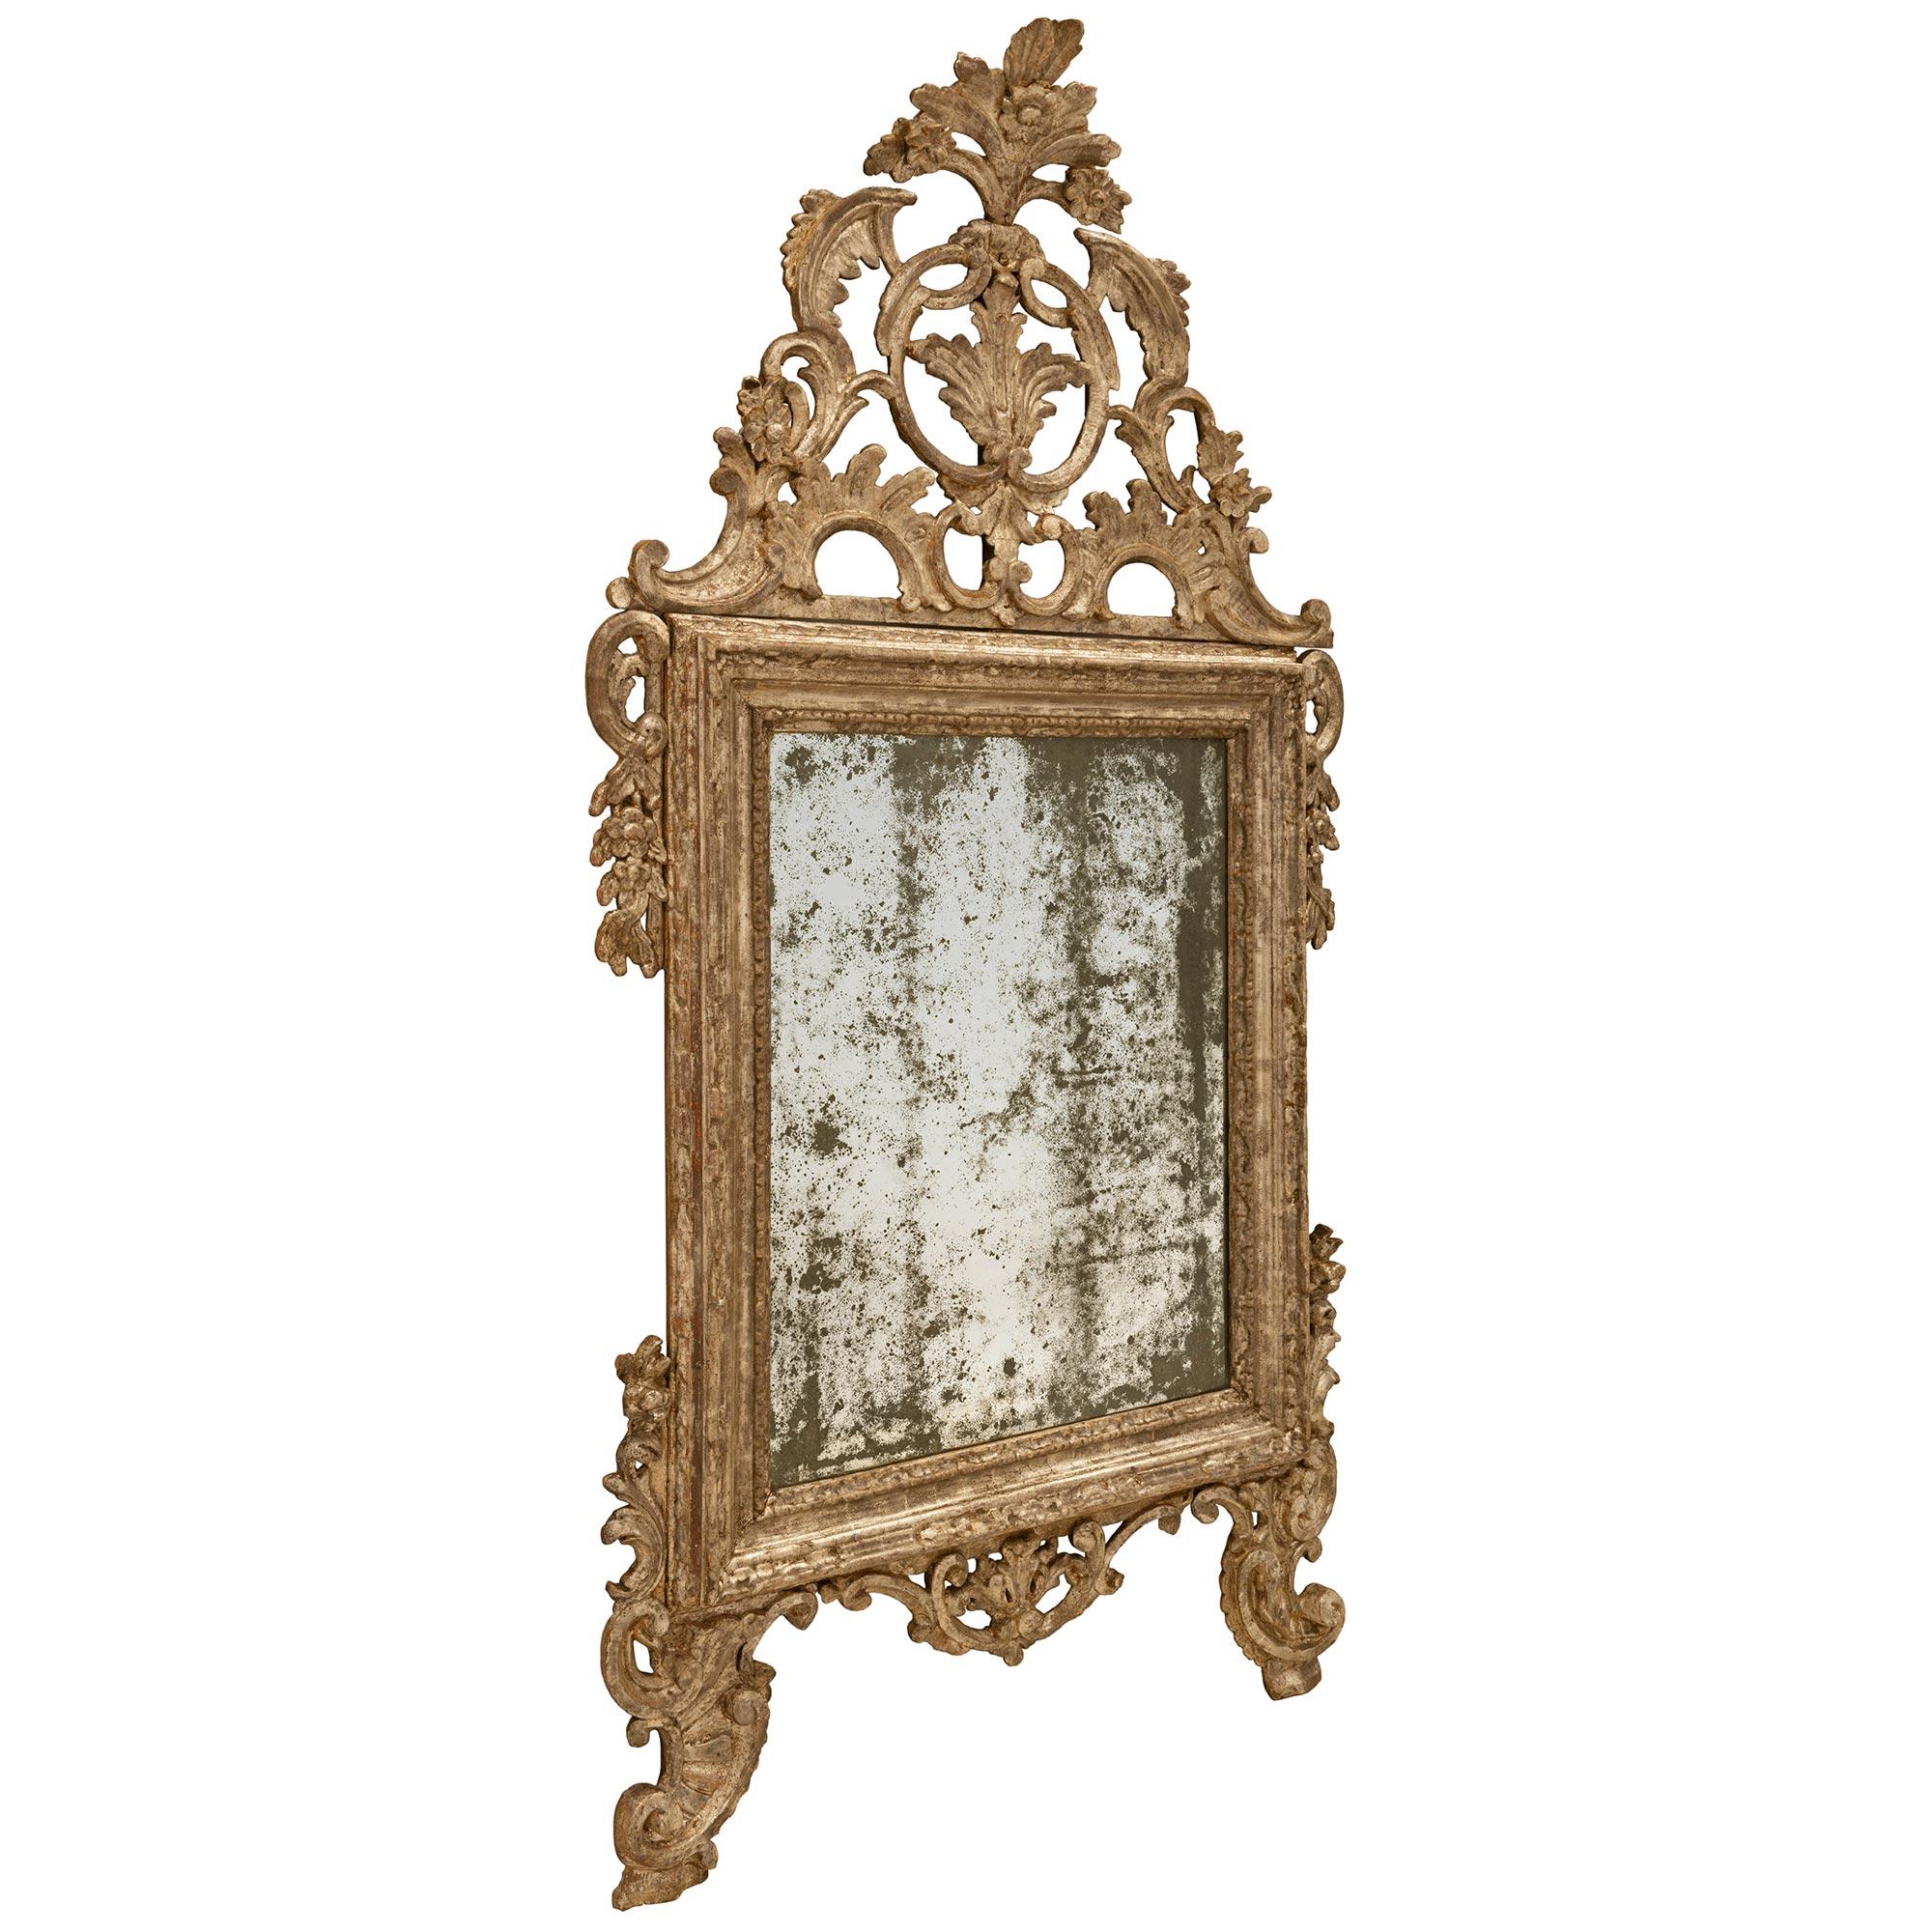 A very unique Italian 18th century Louis XIV period white gold mecca mirror. The two scrolled feet are joined by a pieced acanthus leaf garland. The original mirror plate is framed within the mottled border with rich foliate carvings at each corner.